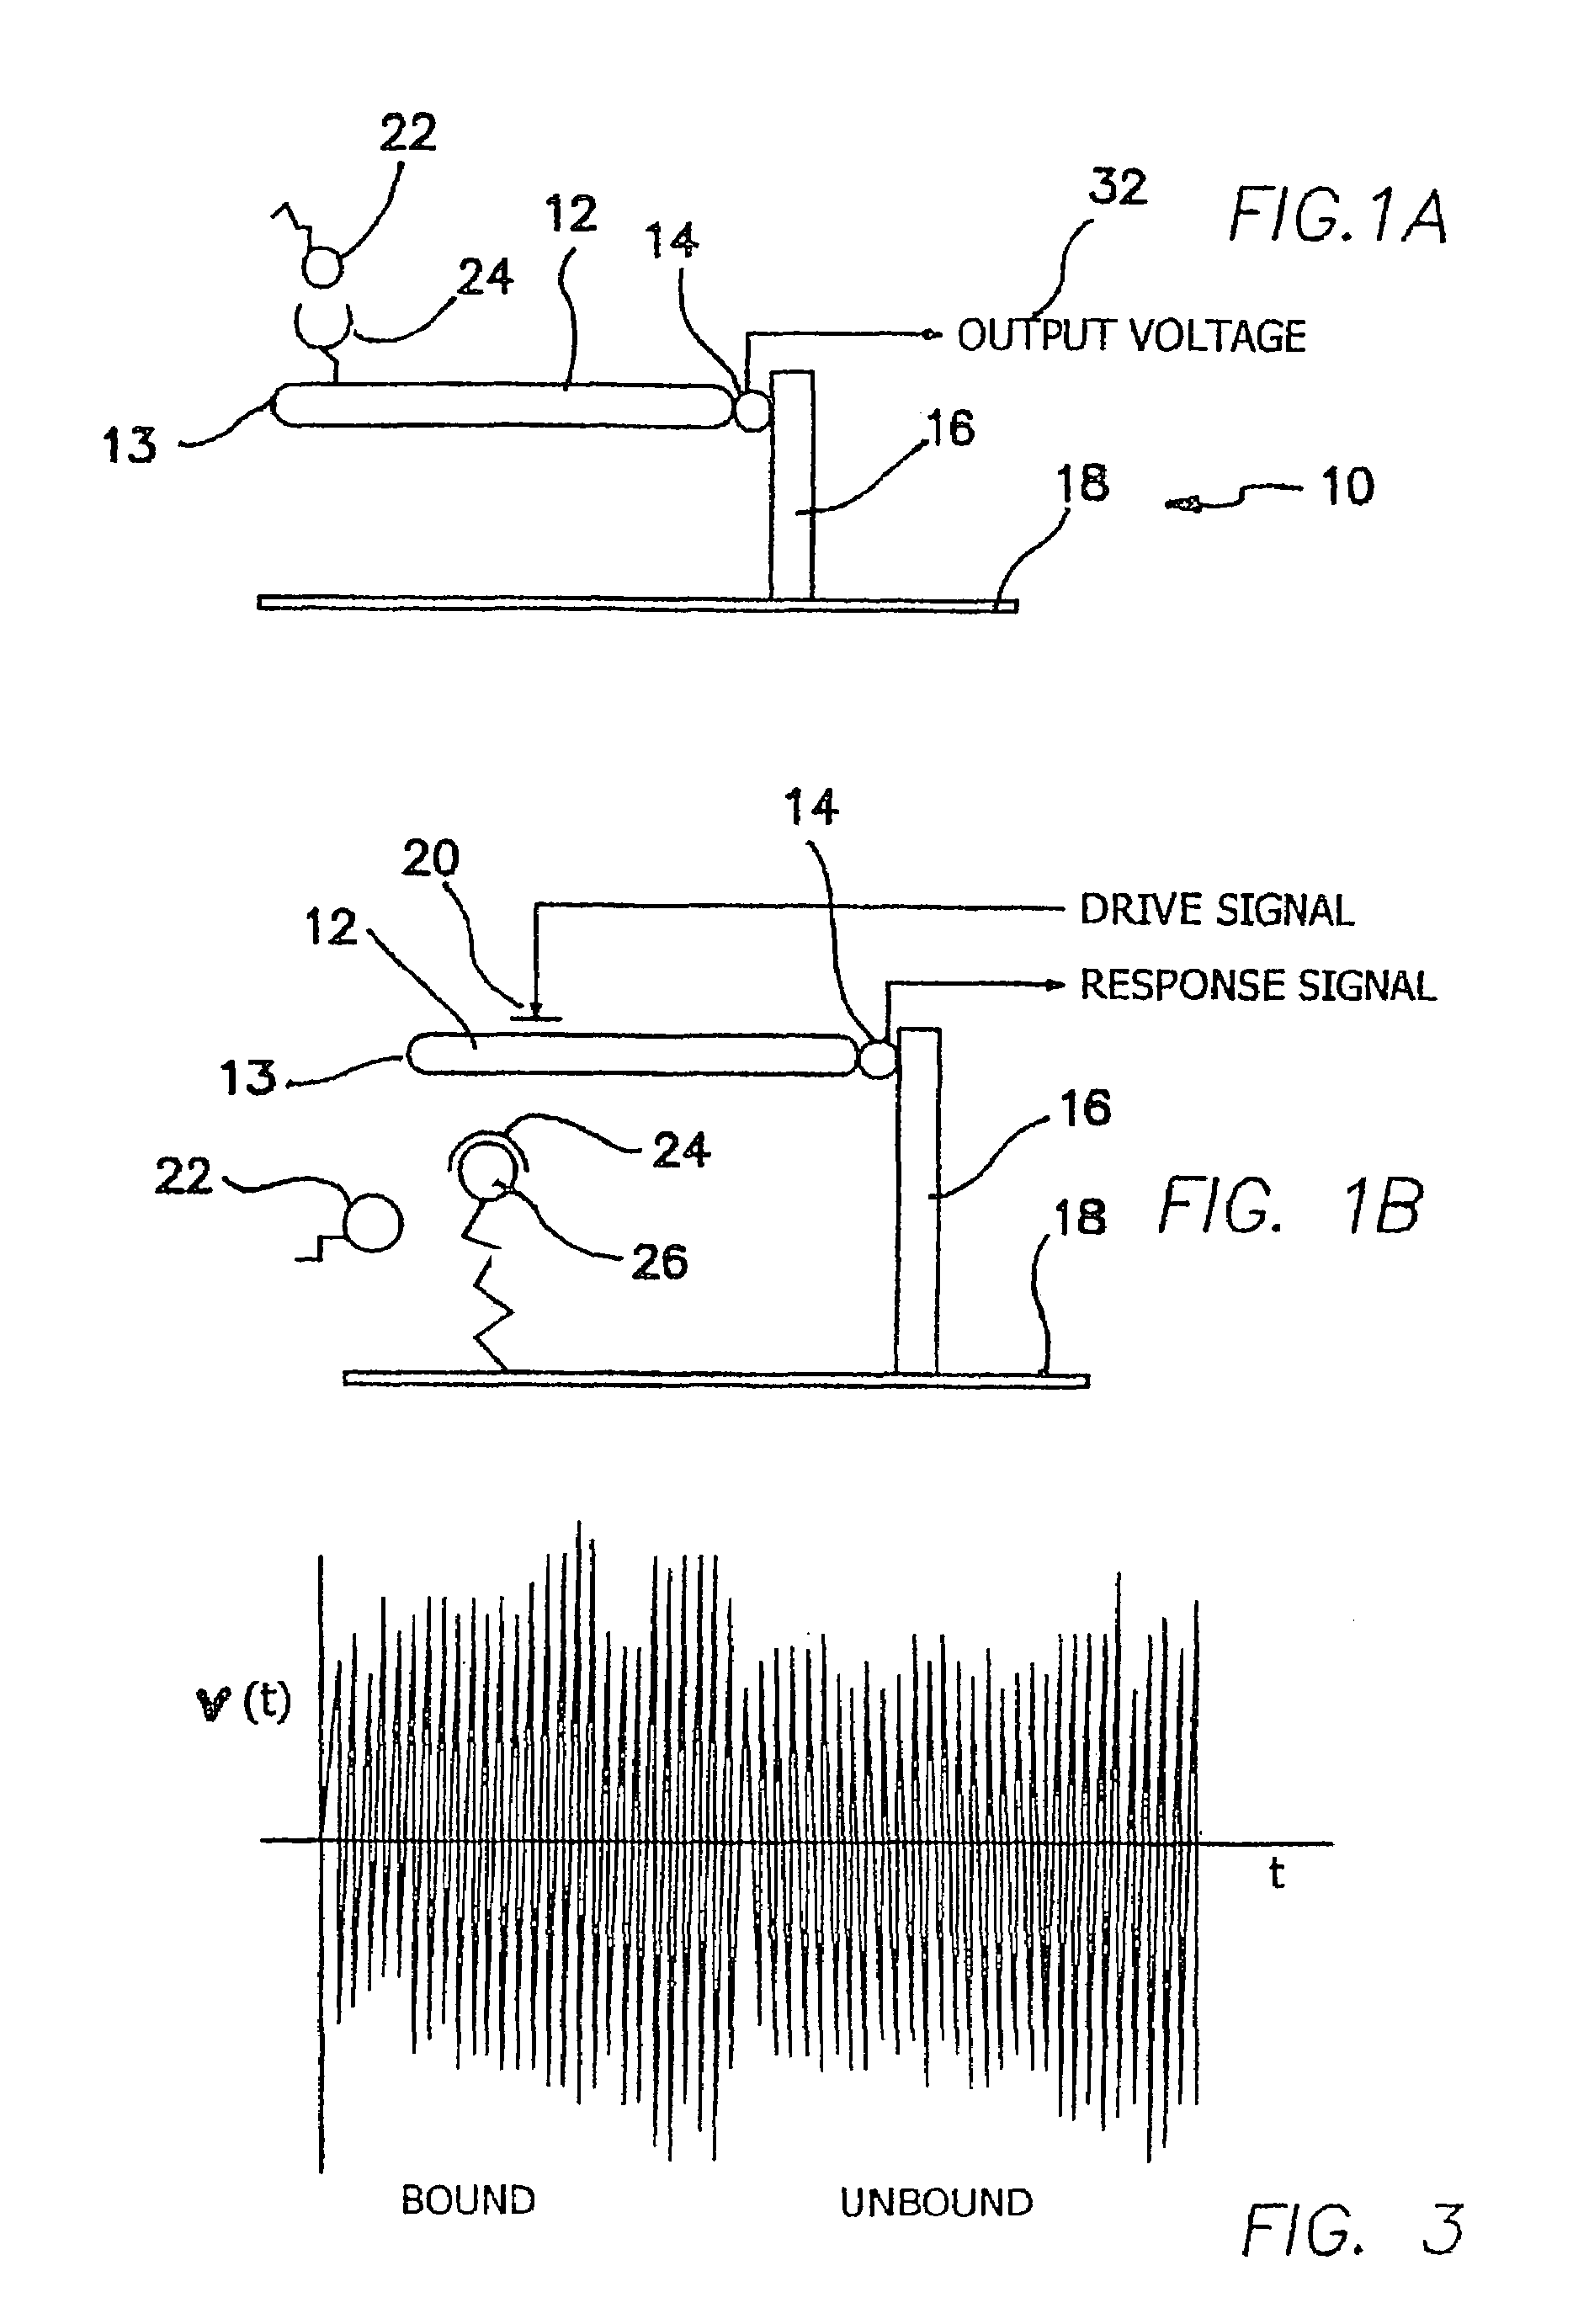 Method and apparatus for providing signal analysis of a BioNEMS resonator or transducer